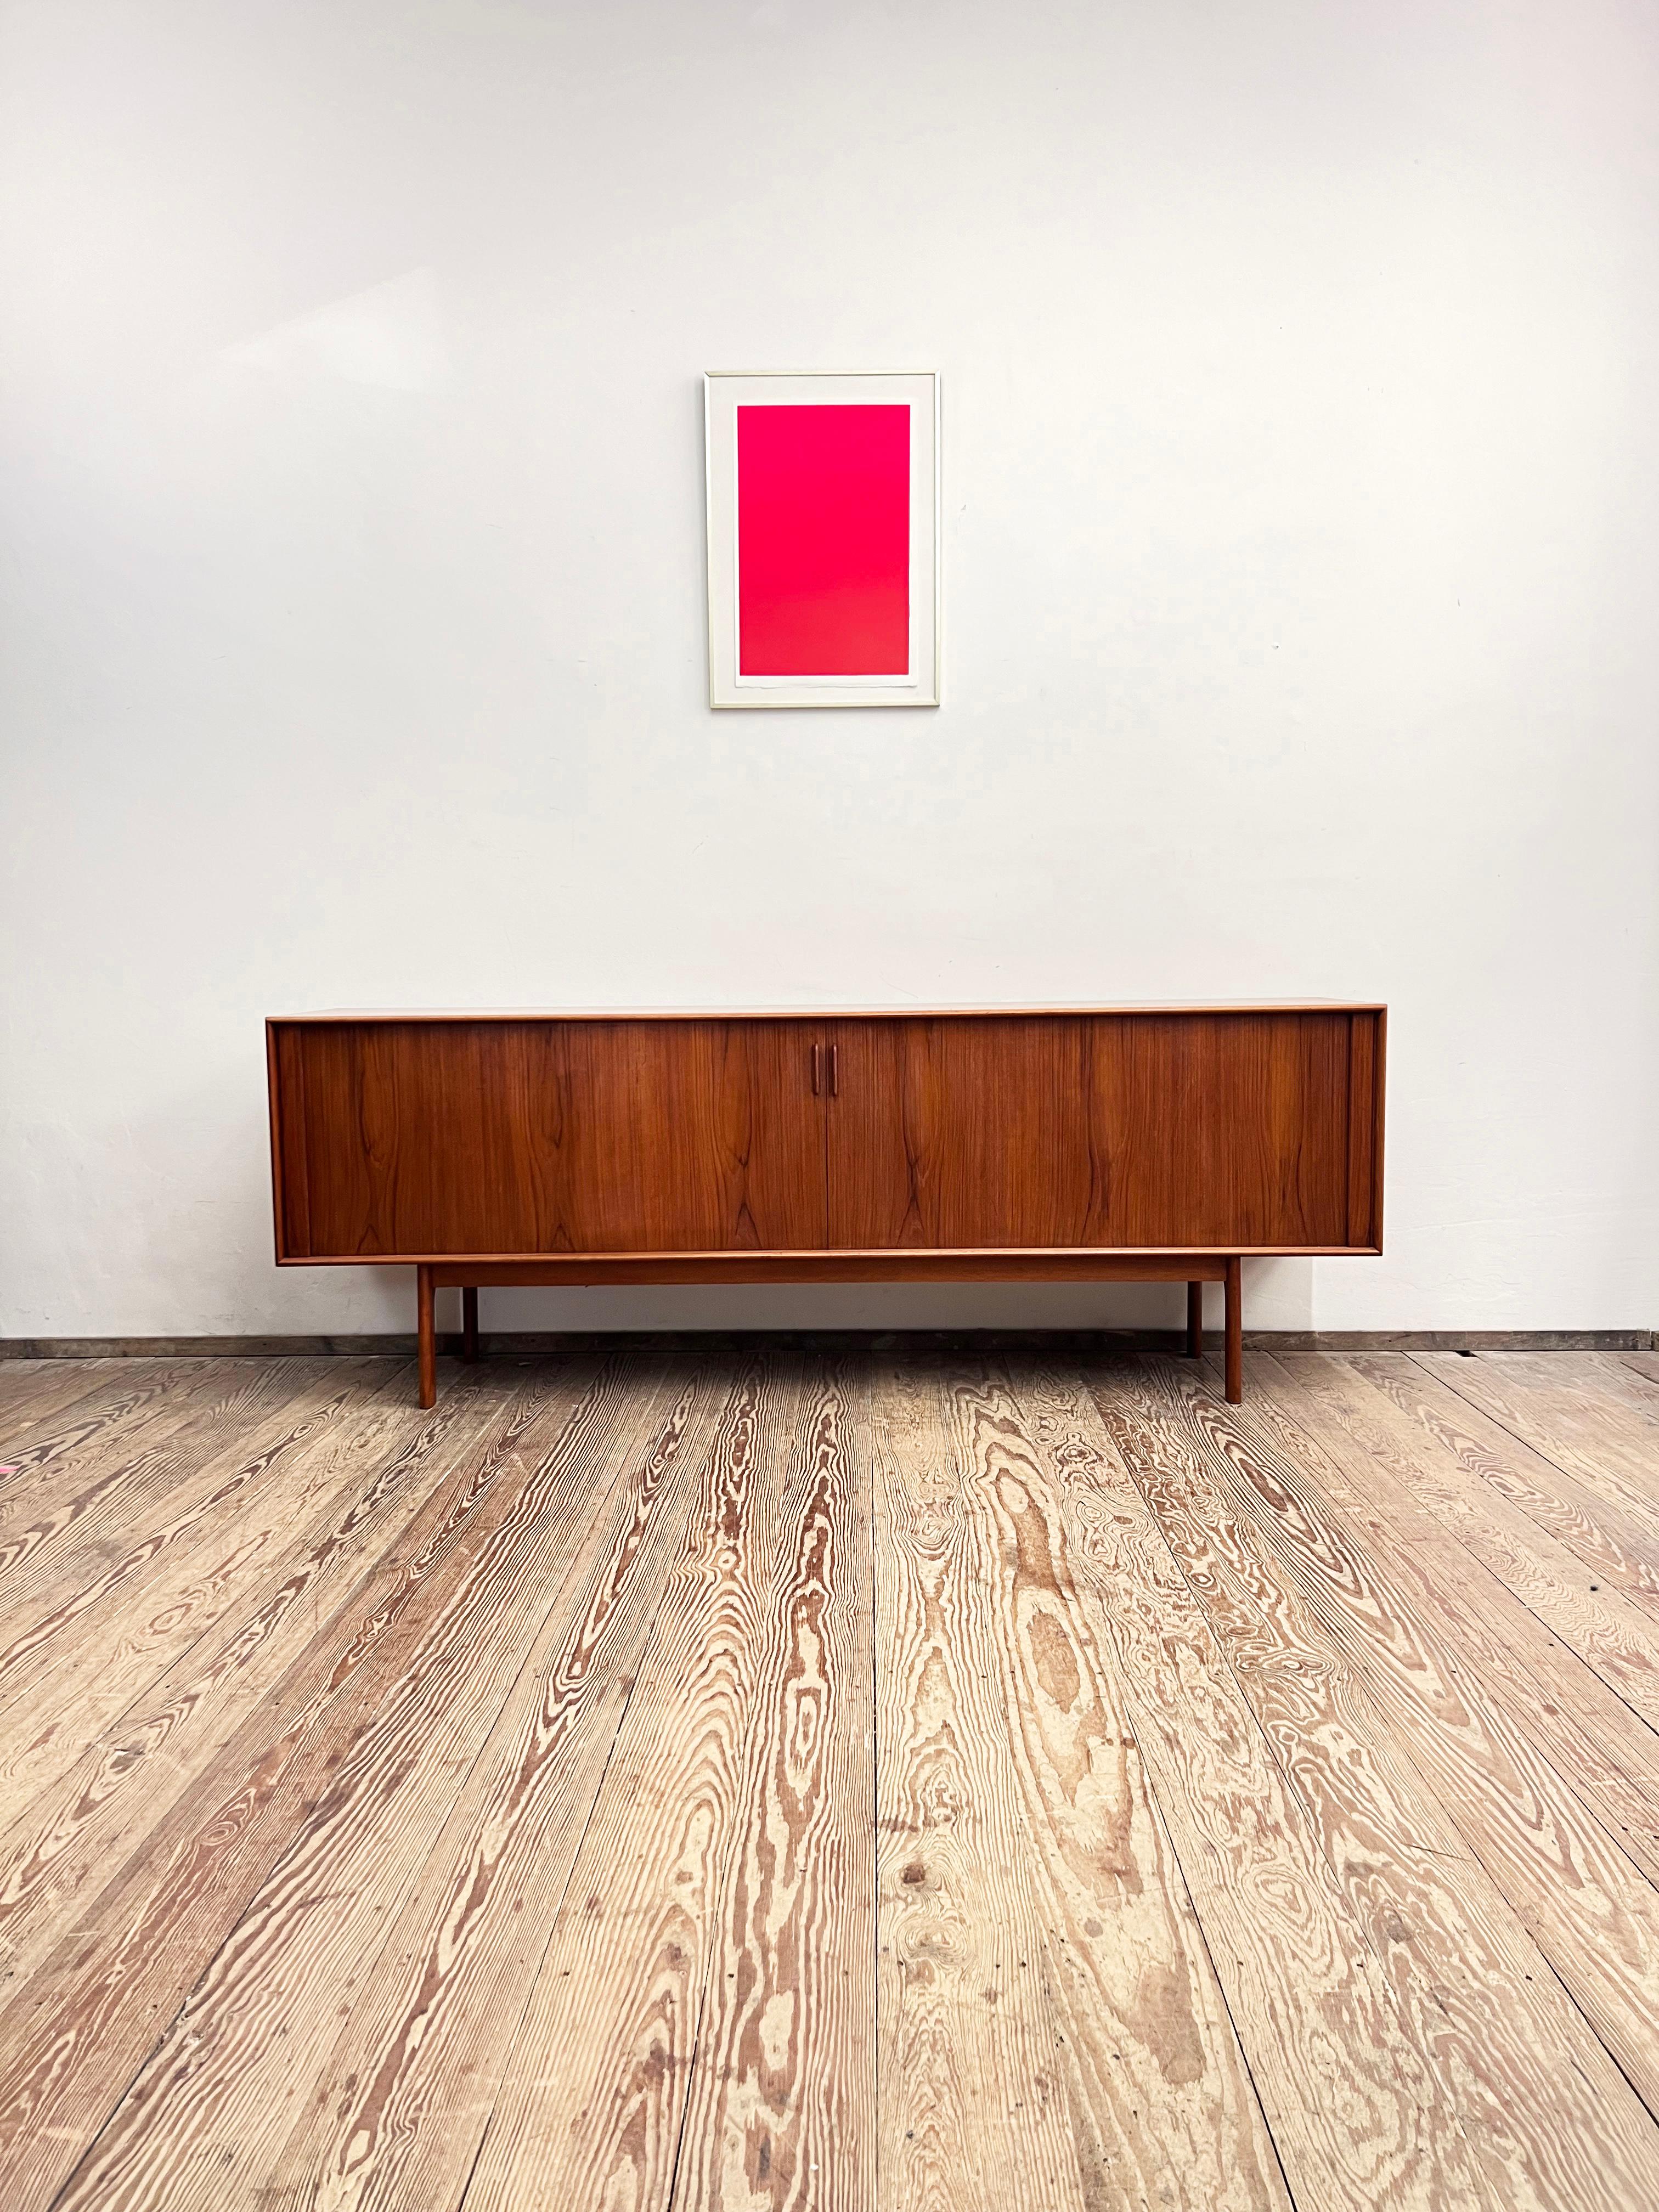 Dimensions: 220x48x80 cm (Width x Depth x Height)

This Scandinavian design sideboard or TV console was designed and manufactured in the 1960s by Danish premium manufacturer Bernhard Pedersen and Søn in Denmark.

The mid-century Credenza showcases